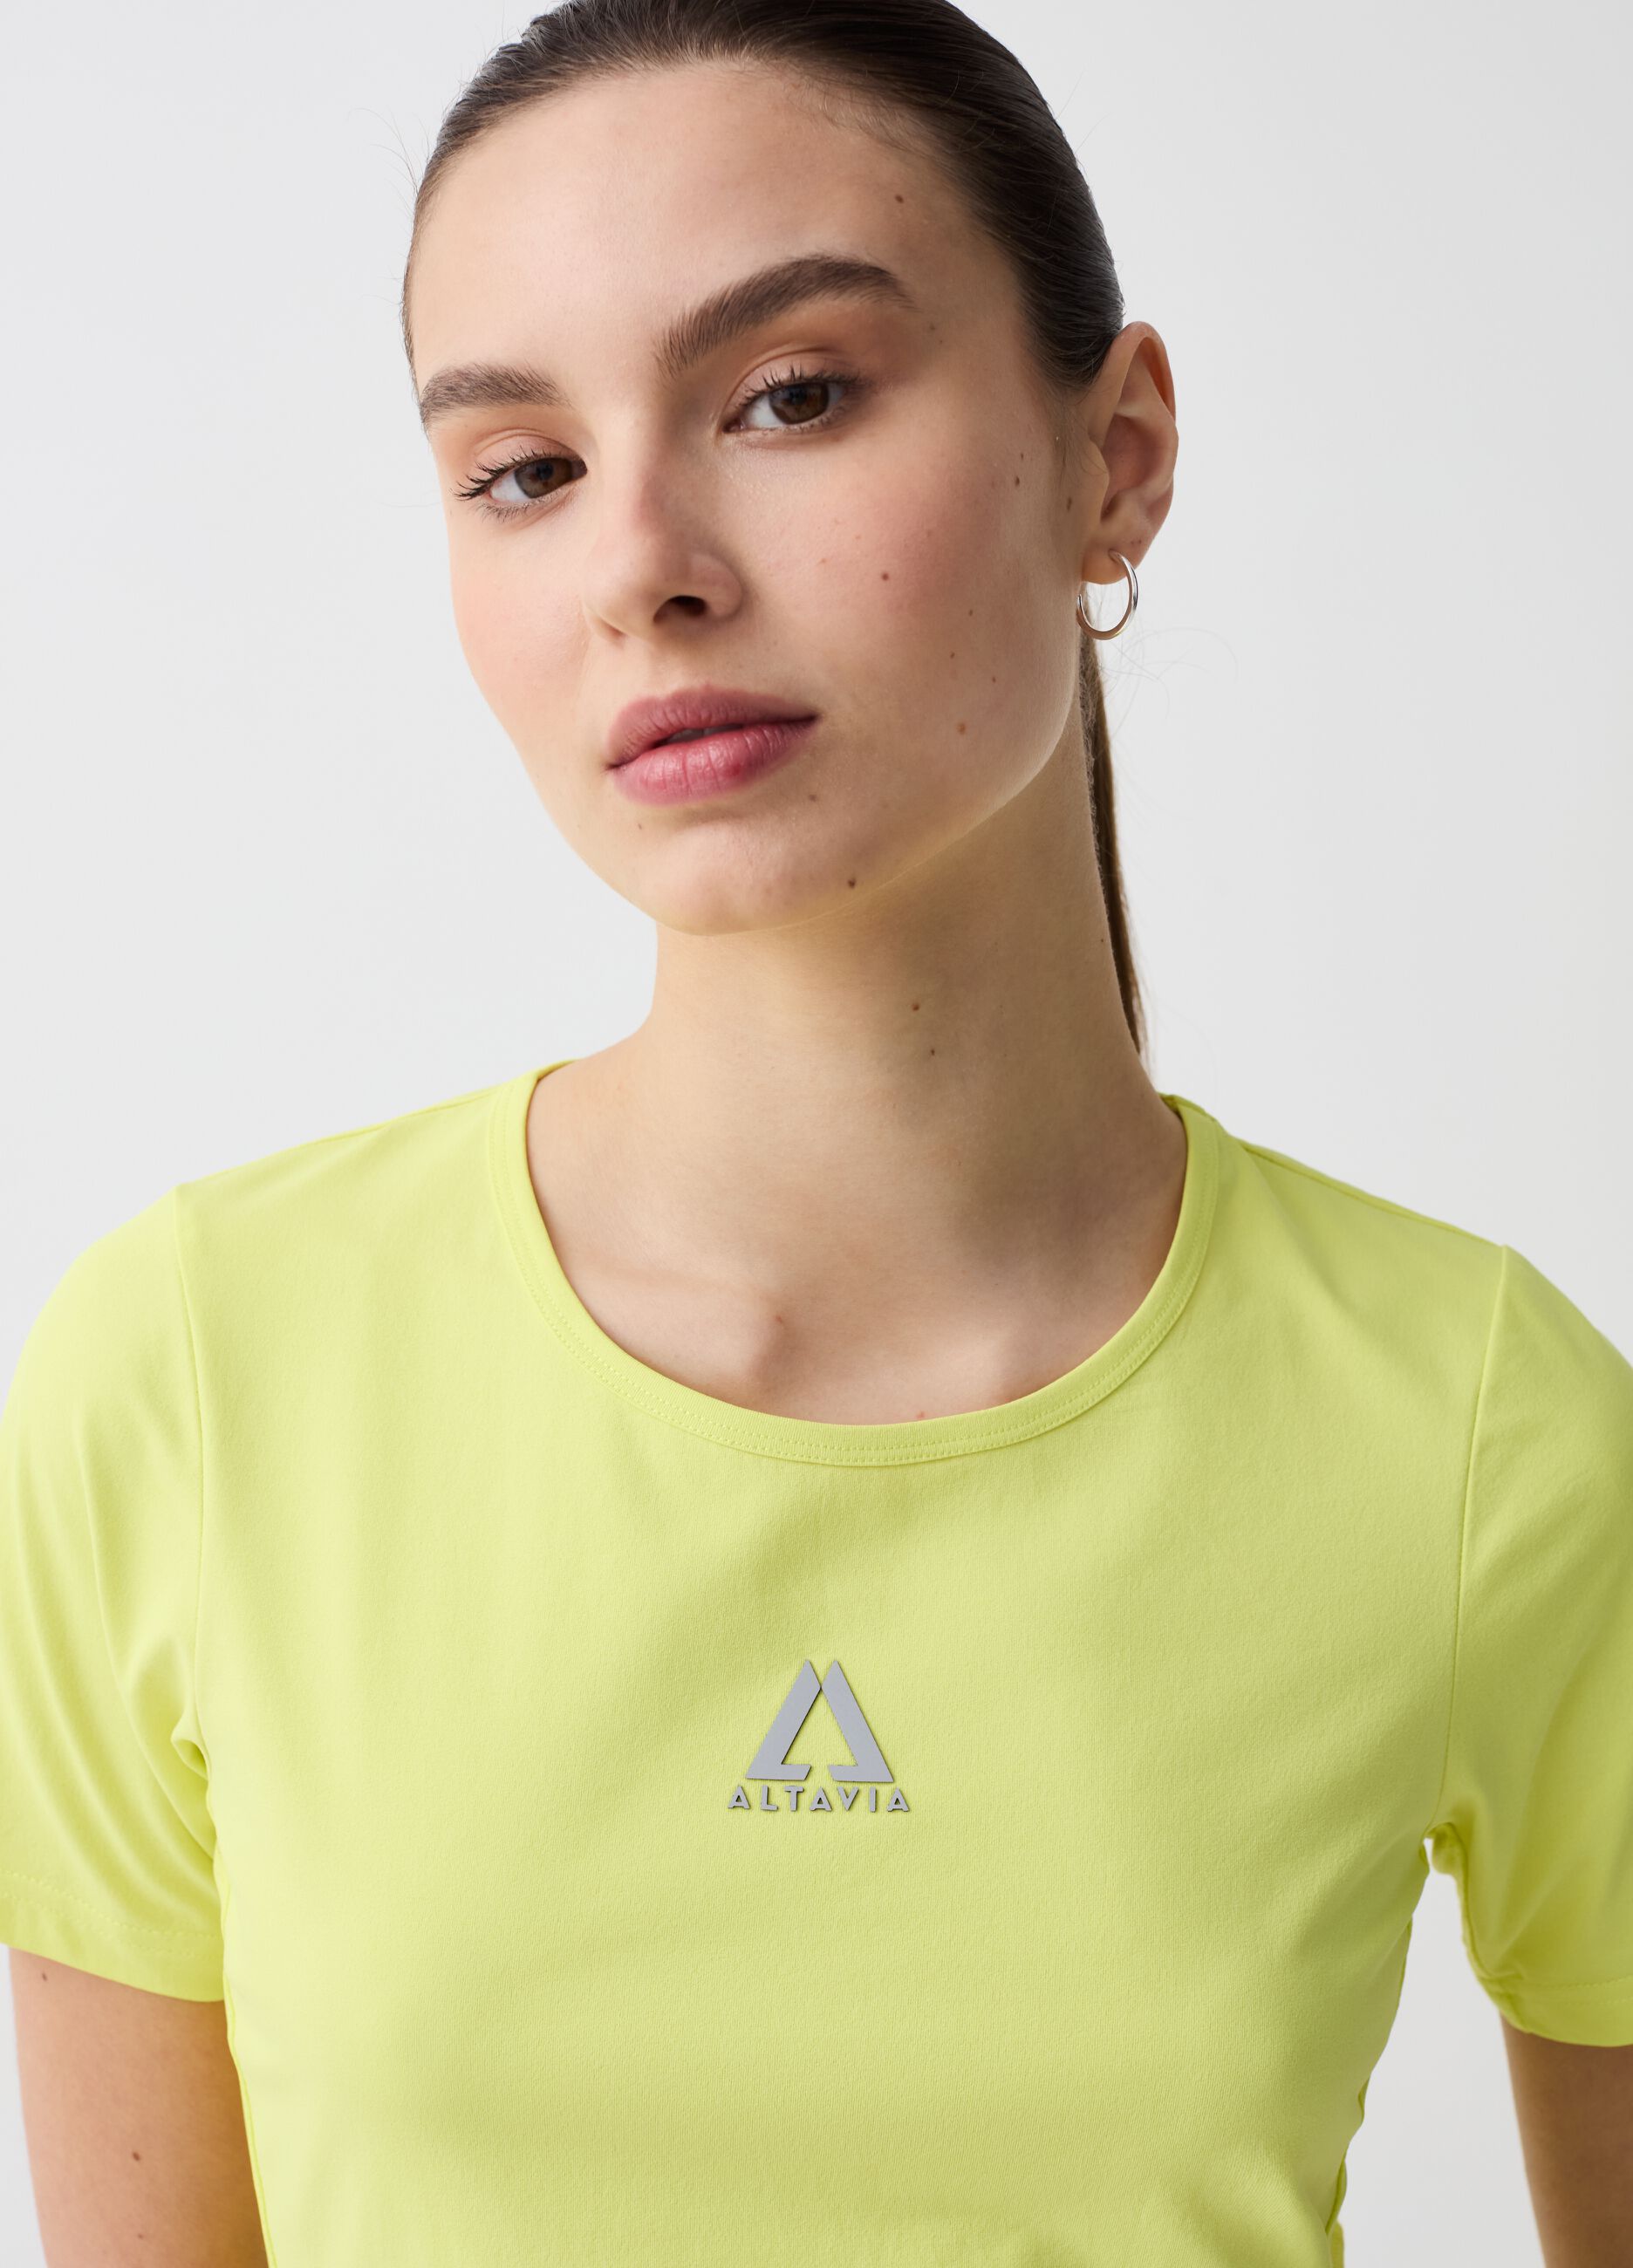 Altavia T-shirt in technical fabric with print